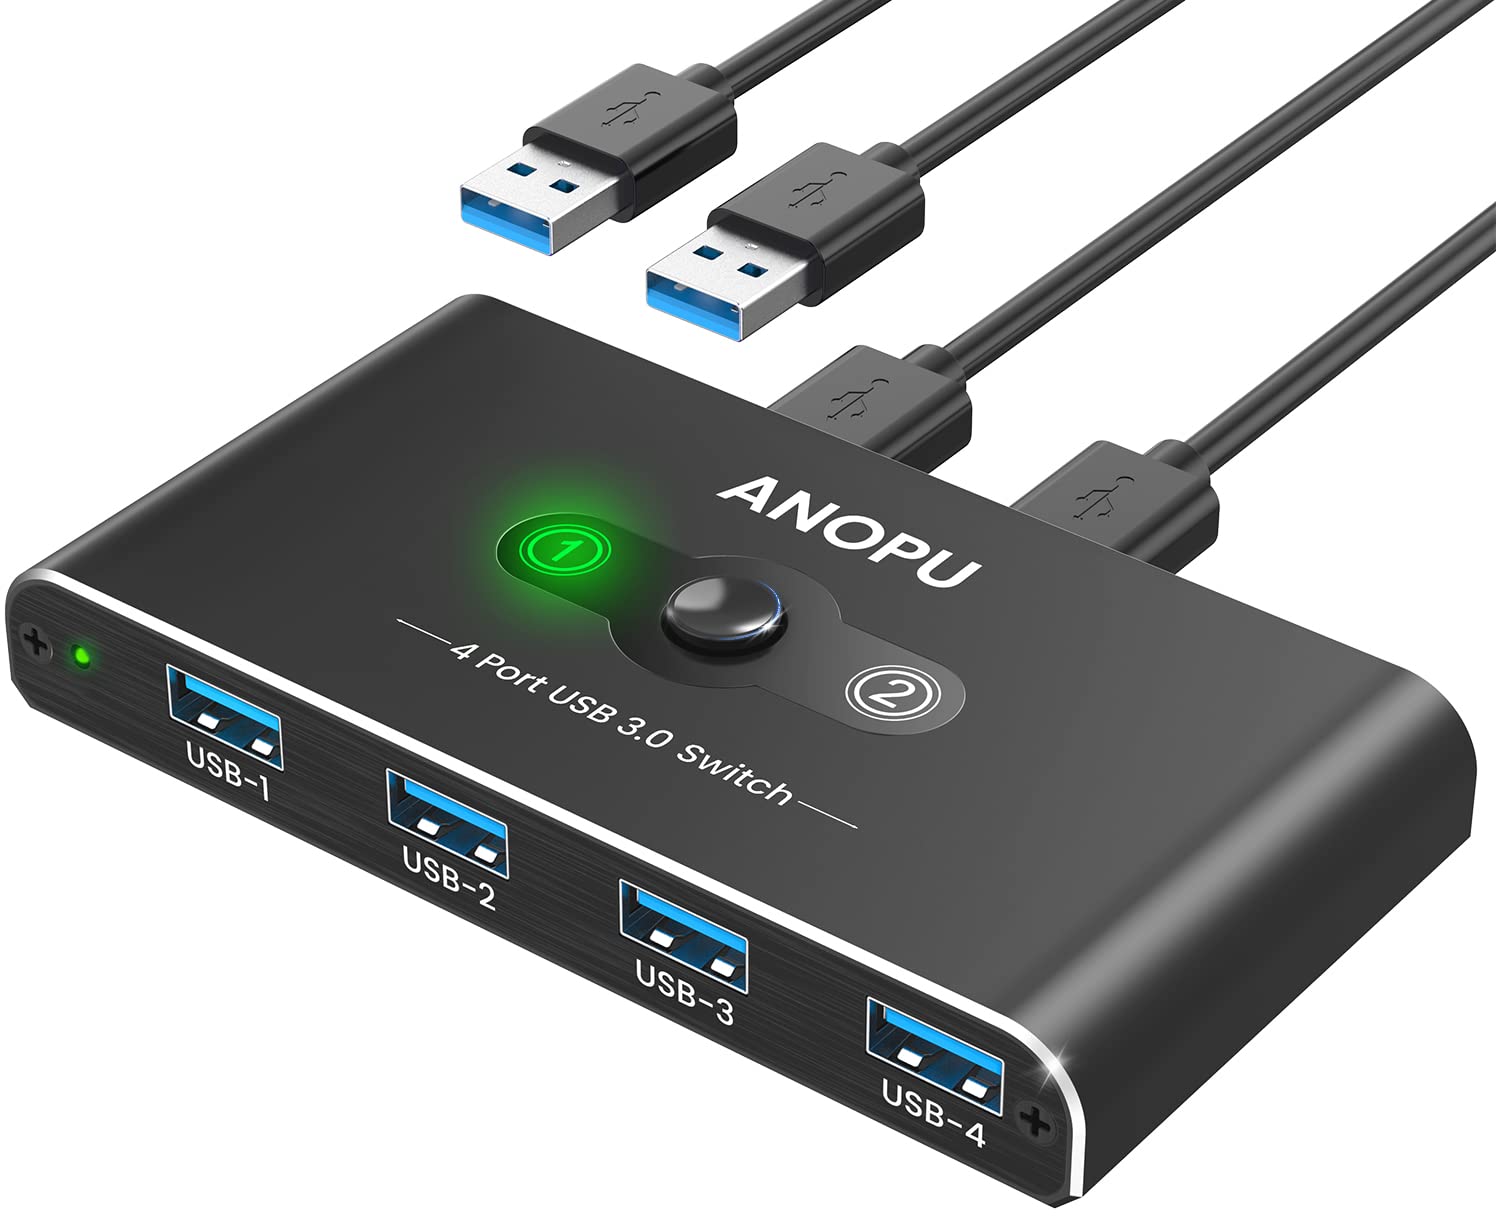 ANOPU USB Switch, USB 30 Switch, Aluminum KM Switch 2 computers Sharing 4 USB Devices KM Switches 5V USB-c Powered for Pc Printer Scan